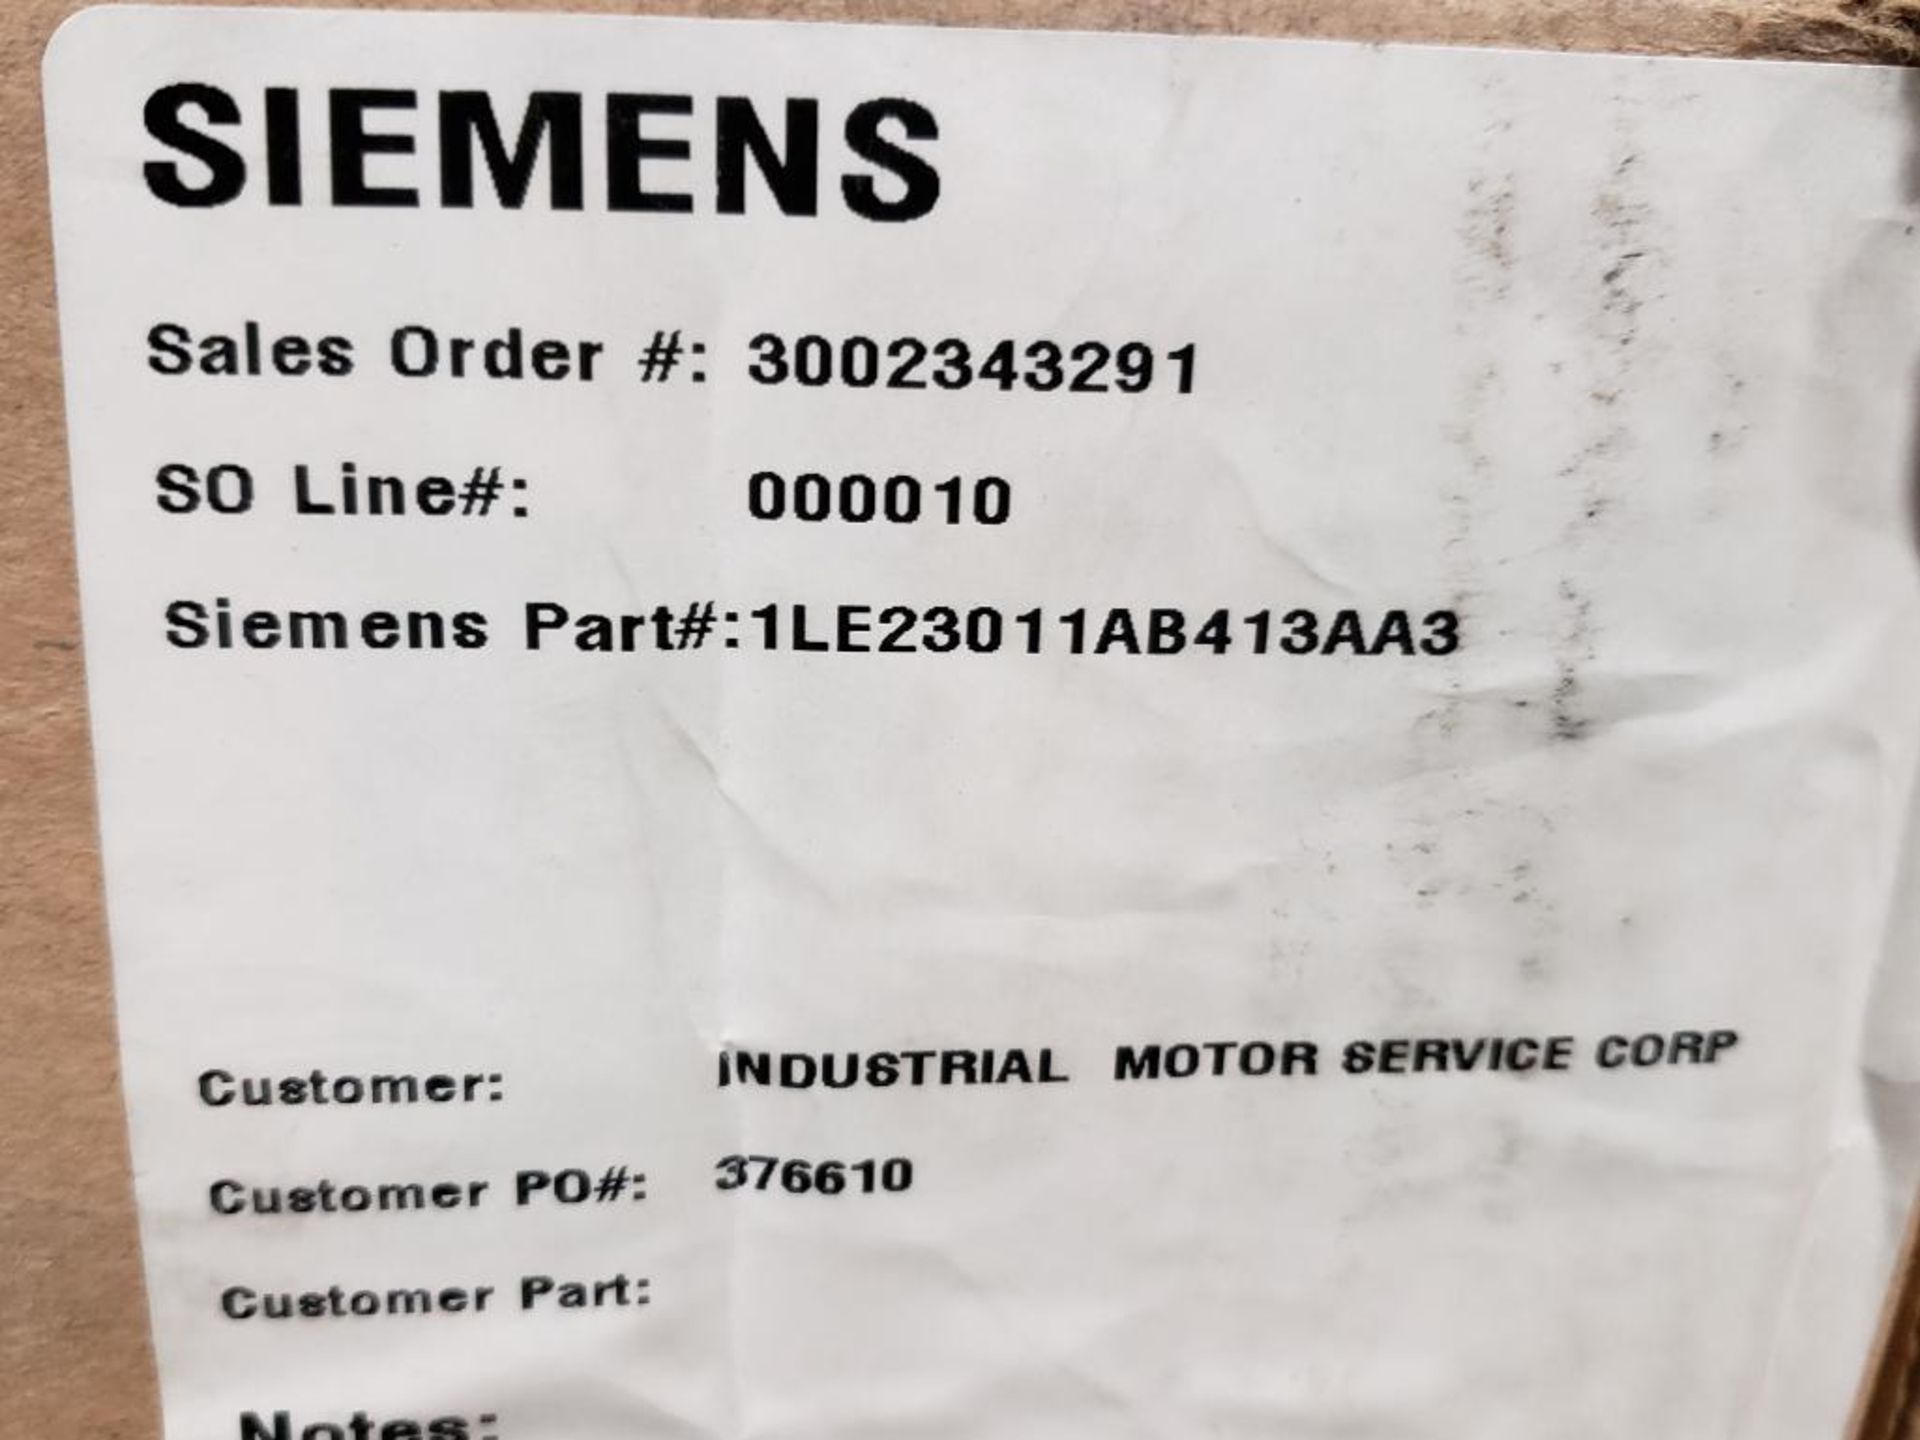 2hp Siemens 1LE23011AB413AA3 high efficiency motor. 3 phase, 575V, 1740RPM, 145T-Frame 2HP - Image 2 of 8